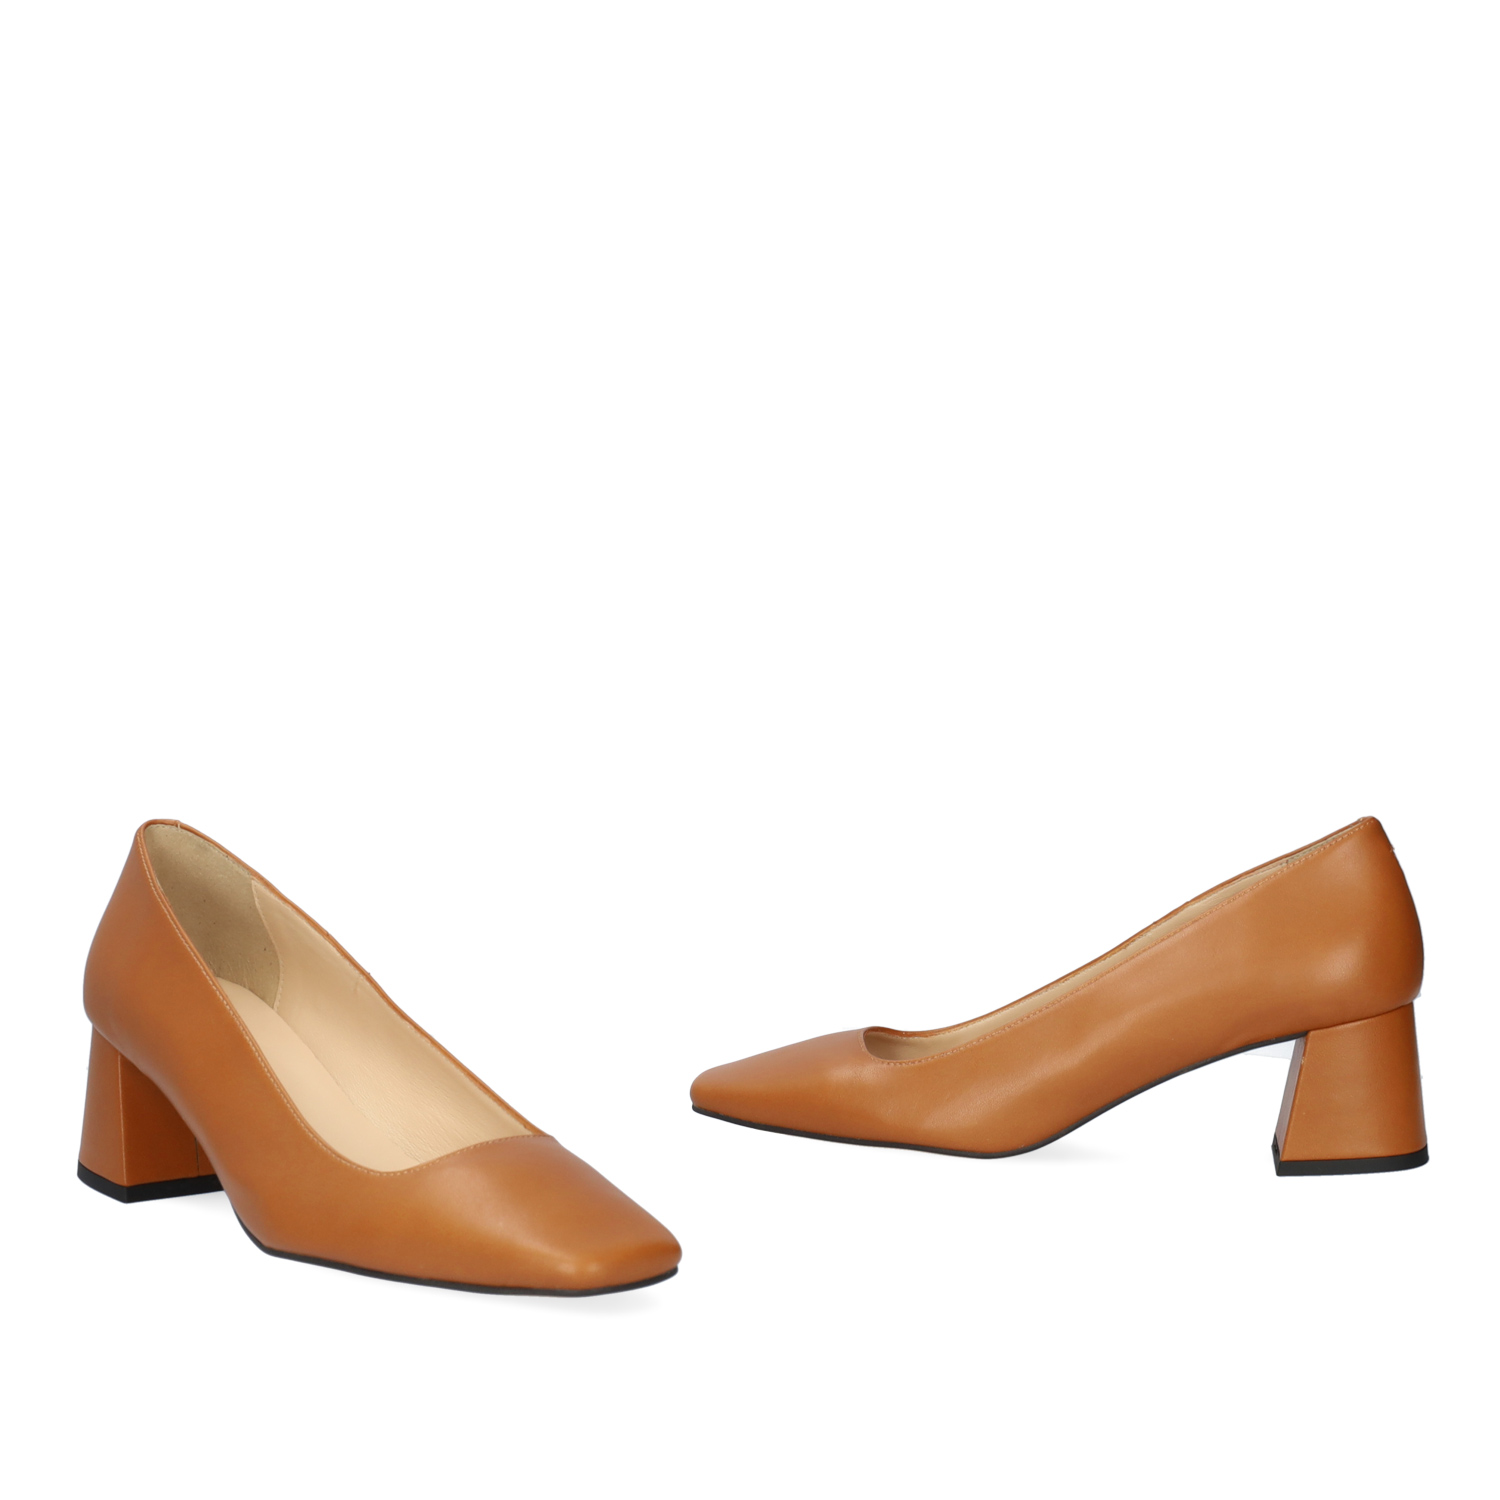 Heeled shoe in brown leather 